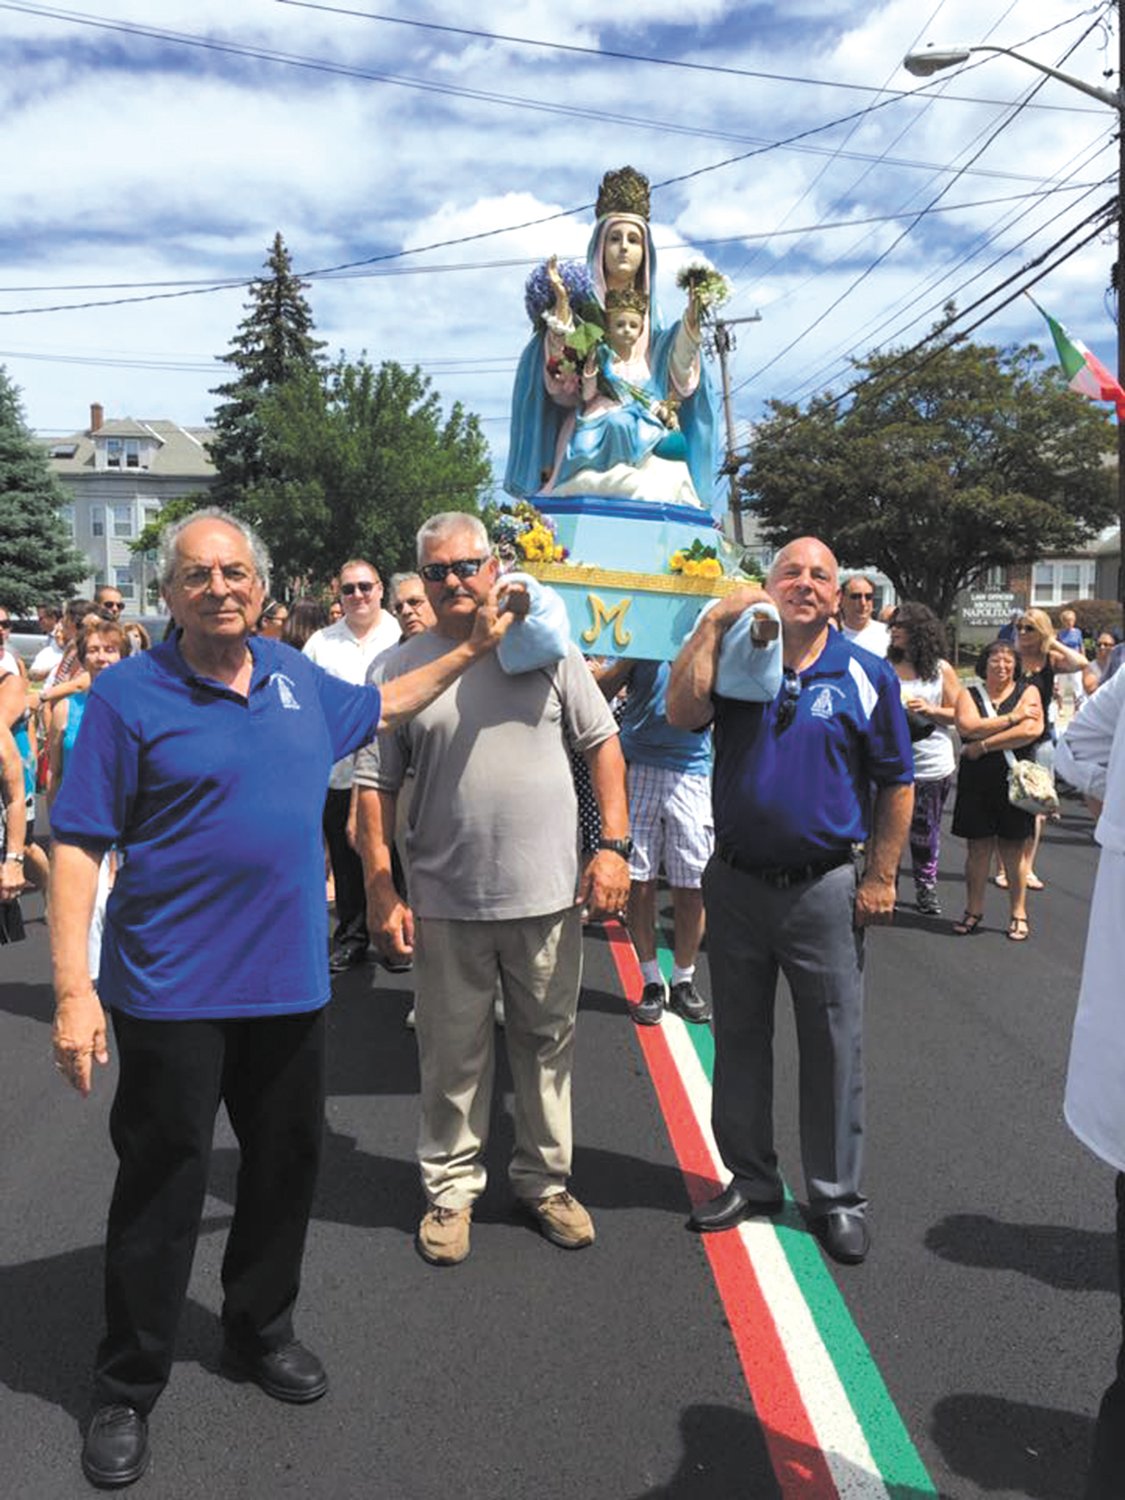 PROCESSION TIME: During the Sunday procession, the statue of Maria Santissima Della Civita is carried down the streets of Knightsville. (Submitted photo)